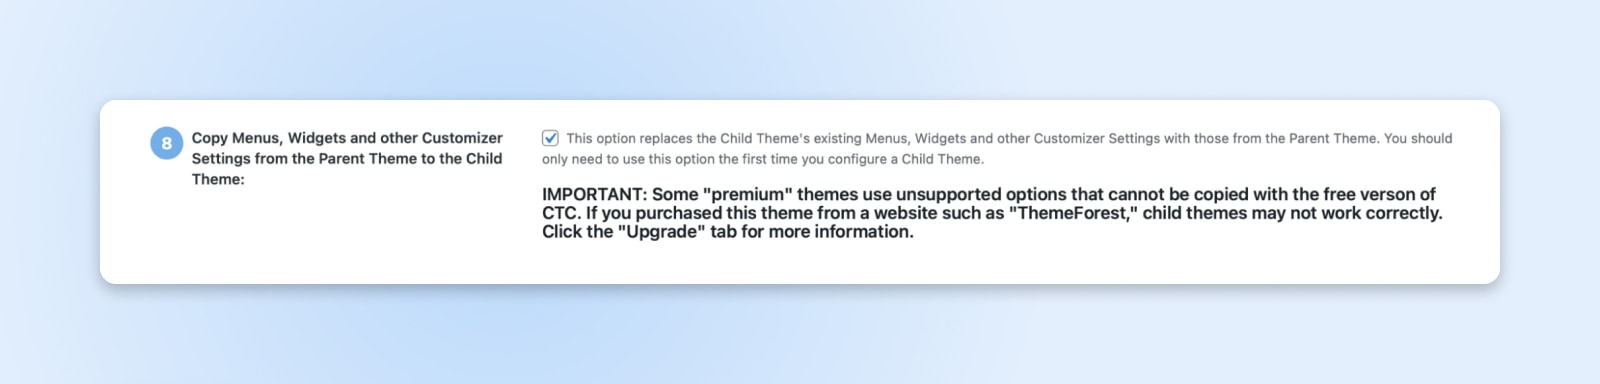 step 8: copy menus, widgets, and other customizer settings from the parents theme to the child theme with the checkbox selected 